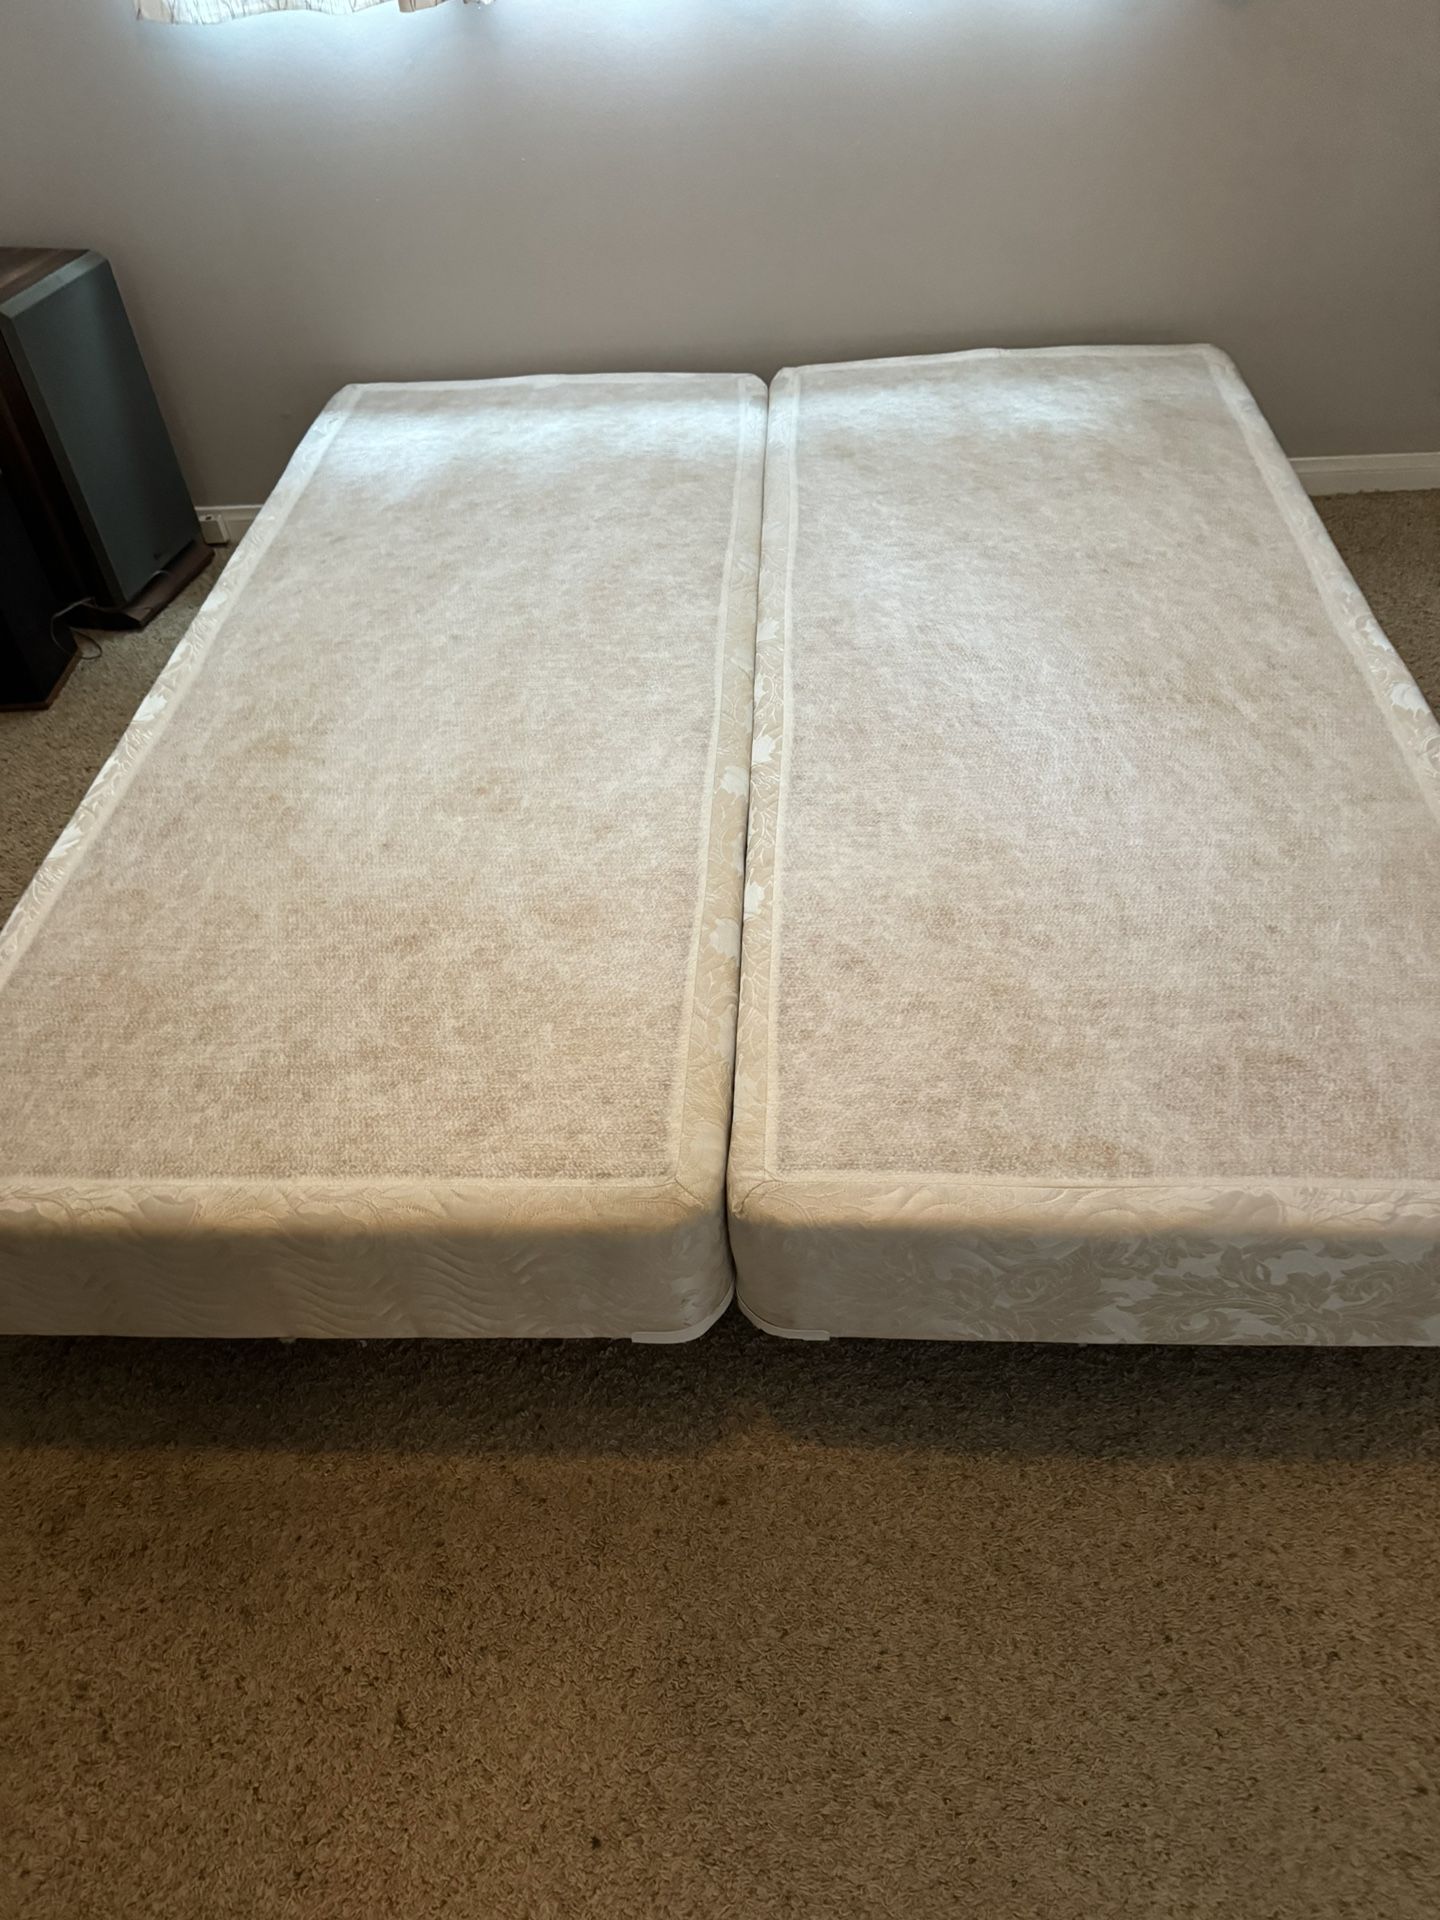 2 Newer XL 9” twin size ( California king ) boxspring $40 each, heavy duty metal bed frame, $50